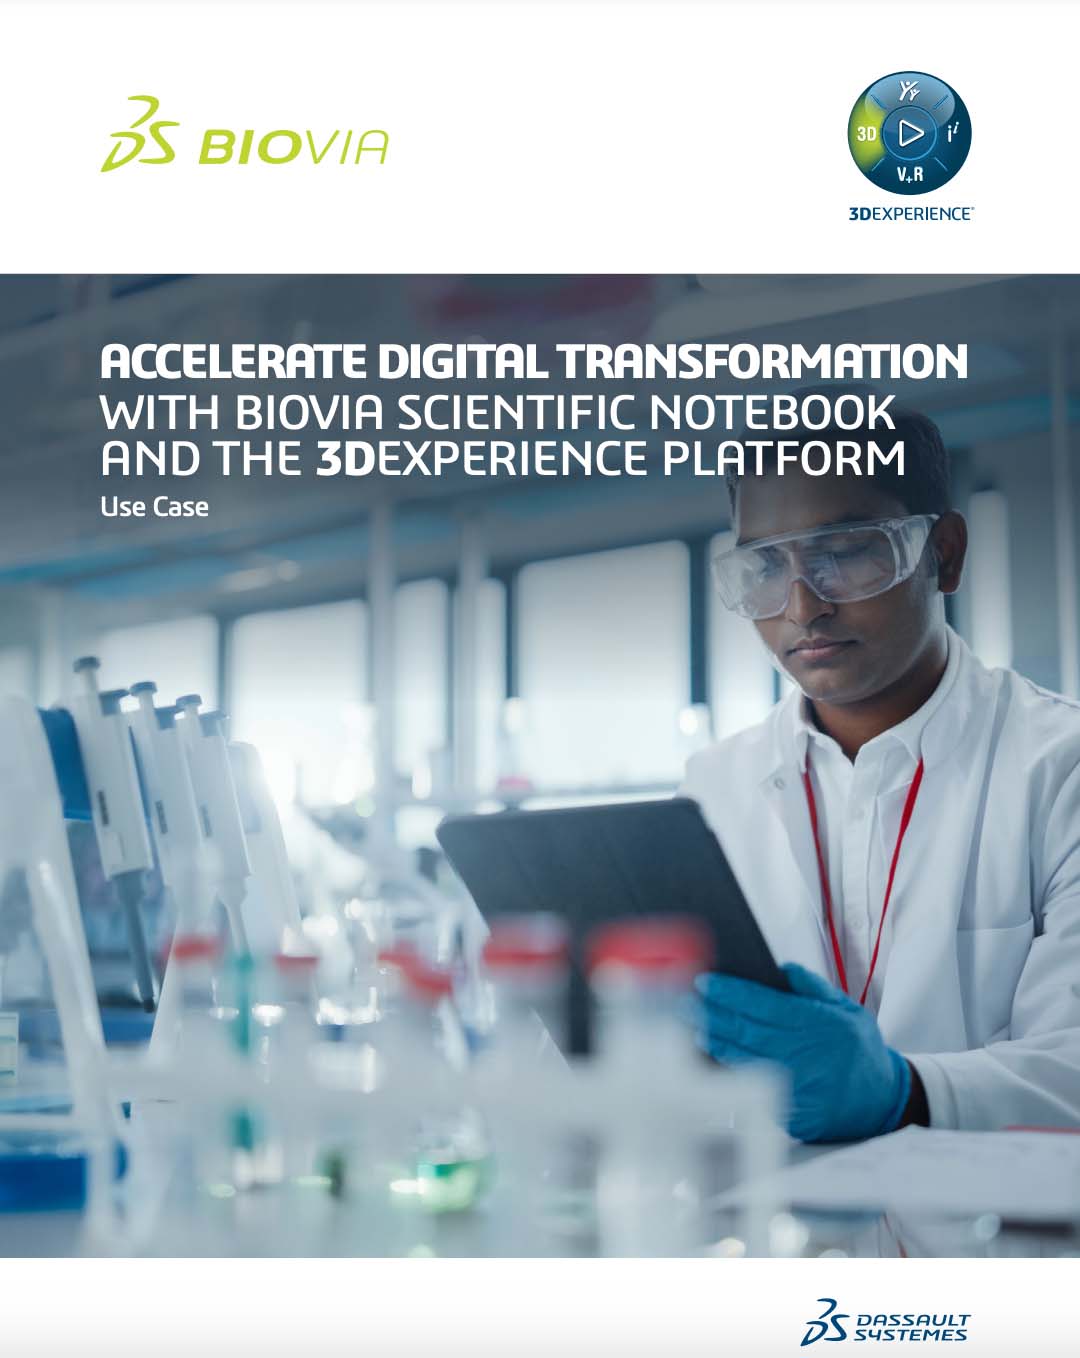 With BIOVIA Scientific Notebook and the 3DEXPERIENCE platform